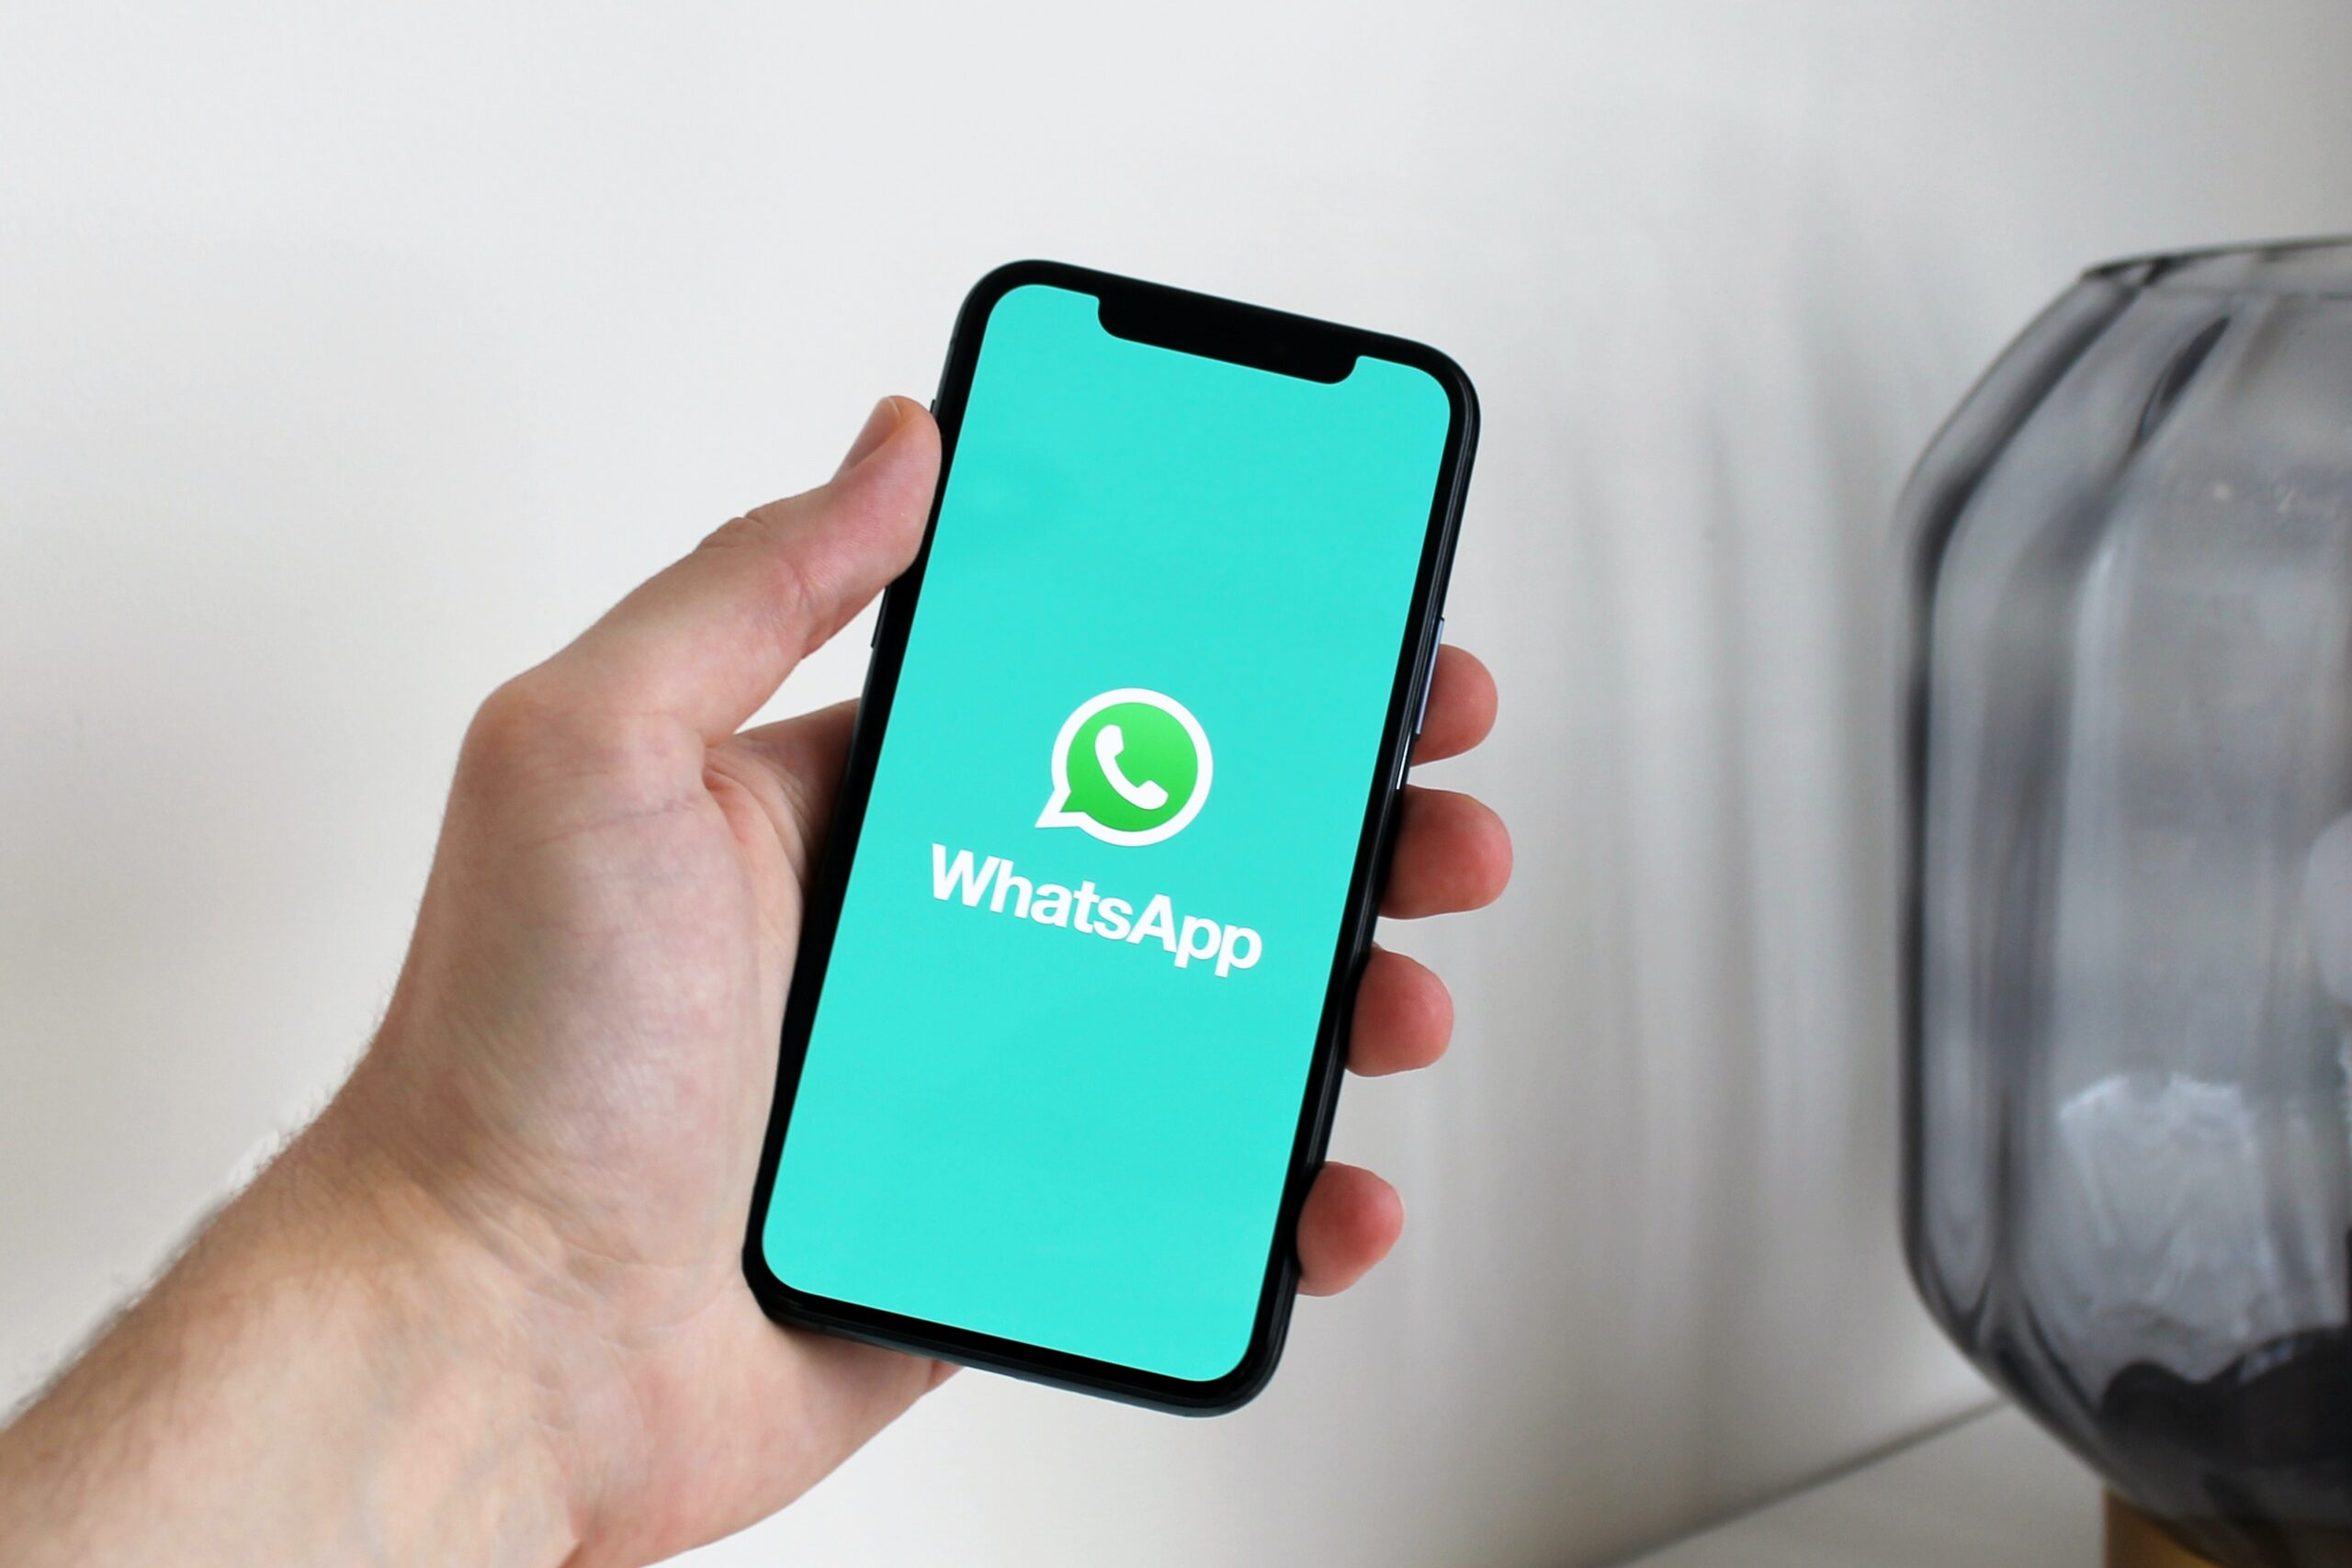 WhatsApp Finally Allows Users to React to Messages With Any Emoji